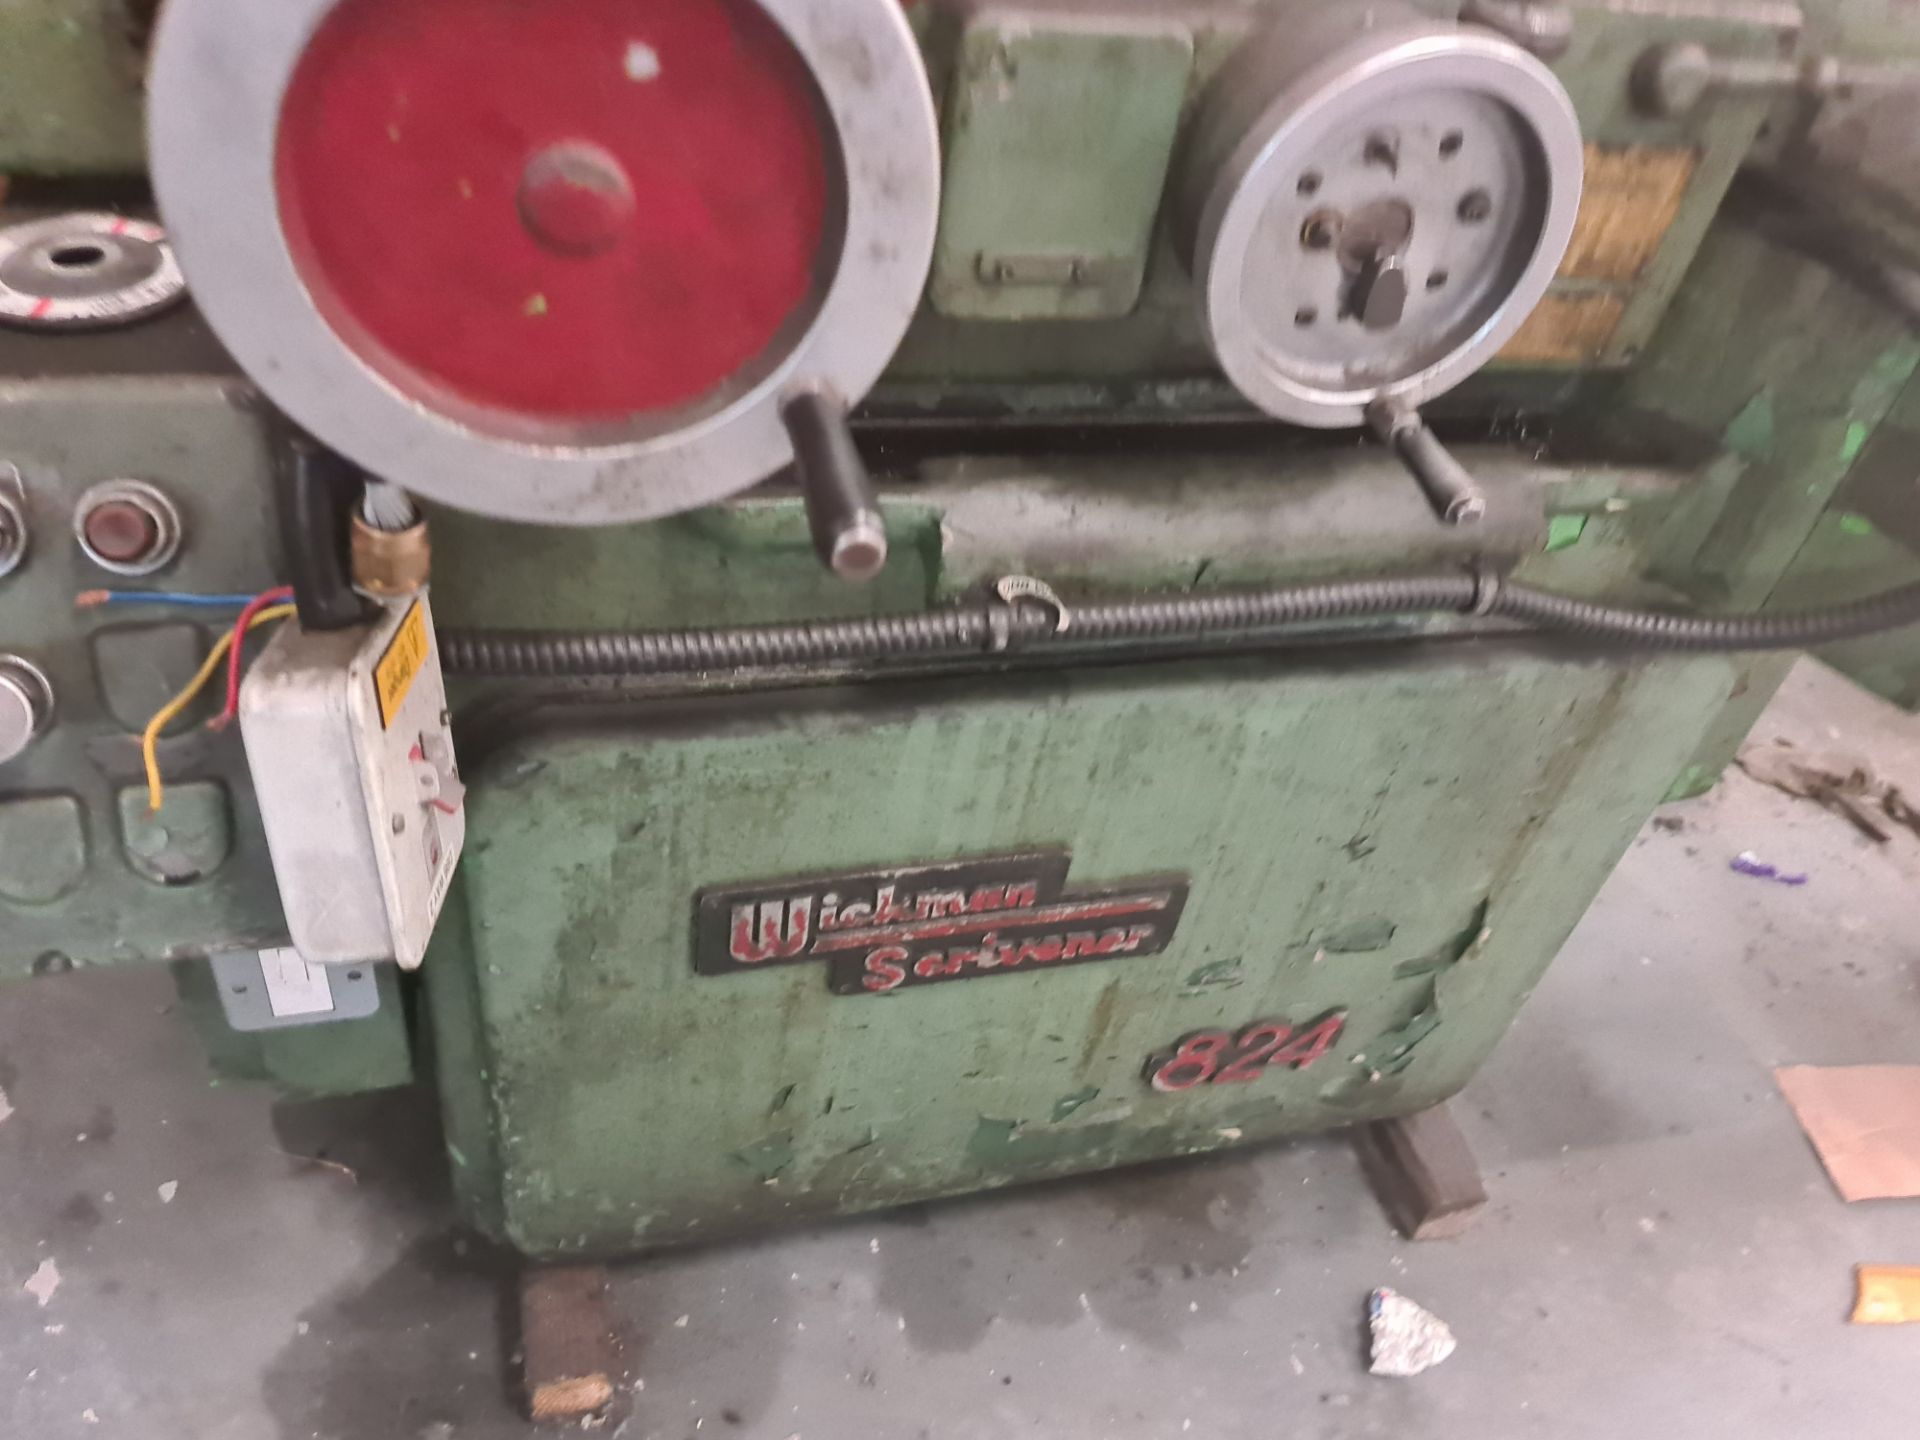 Wickman Scrivener 824 surface grinding machine with 24" x 8" magnetic chuck. Includes cooling box, - Image 21 of 37